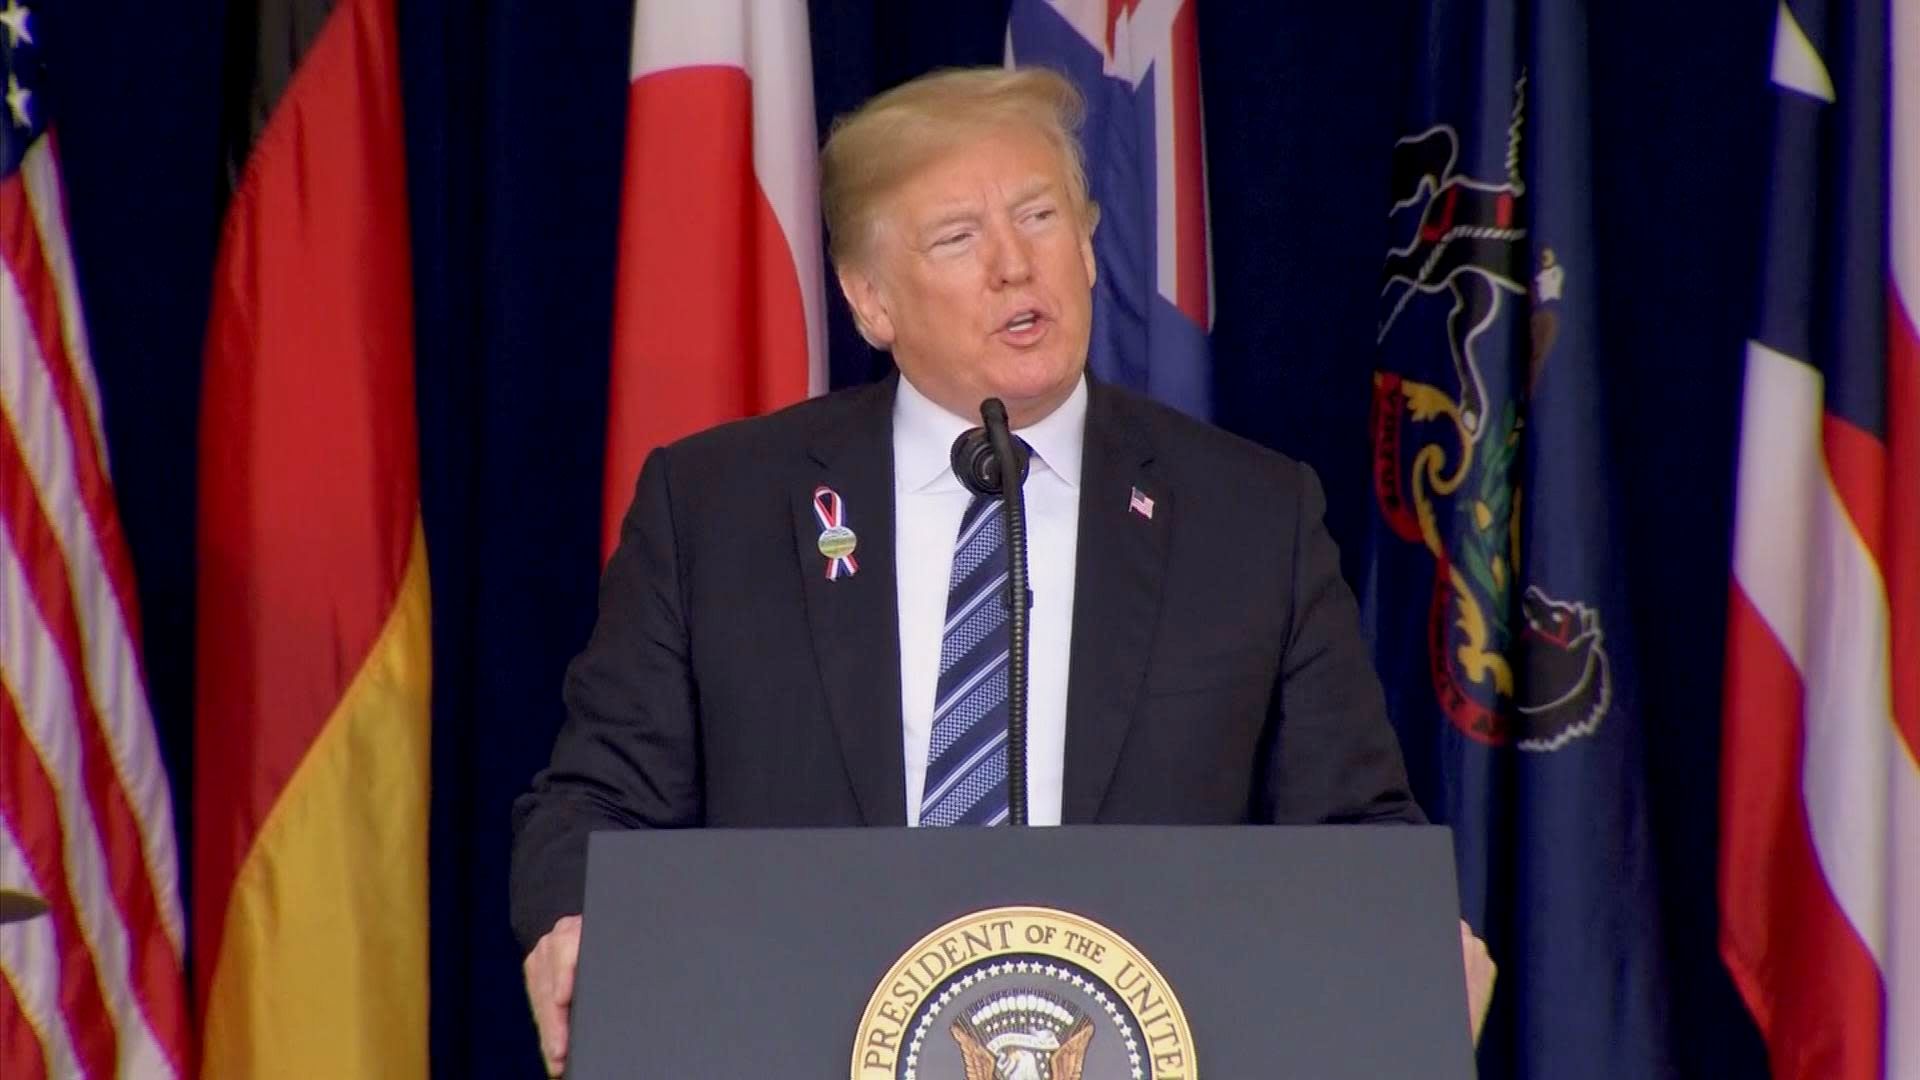 President Donald Trump Full Speech: Honors 9/11 Victims at Shanksville Memorial | NBC NewsGoogle image from https://www.cnbc.com/2018/09/11/trump-911-memorial-is-where-heroes-stopped-the-forces-of-terror.html